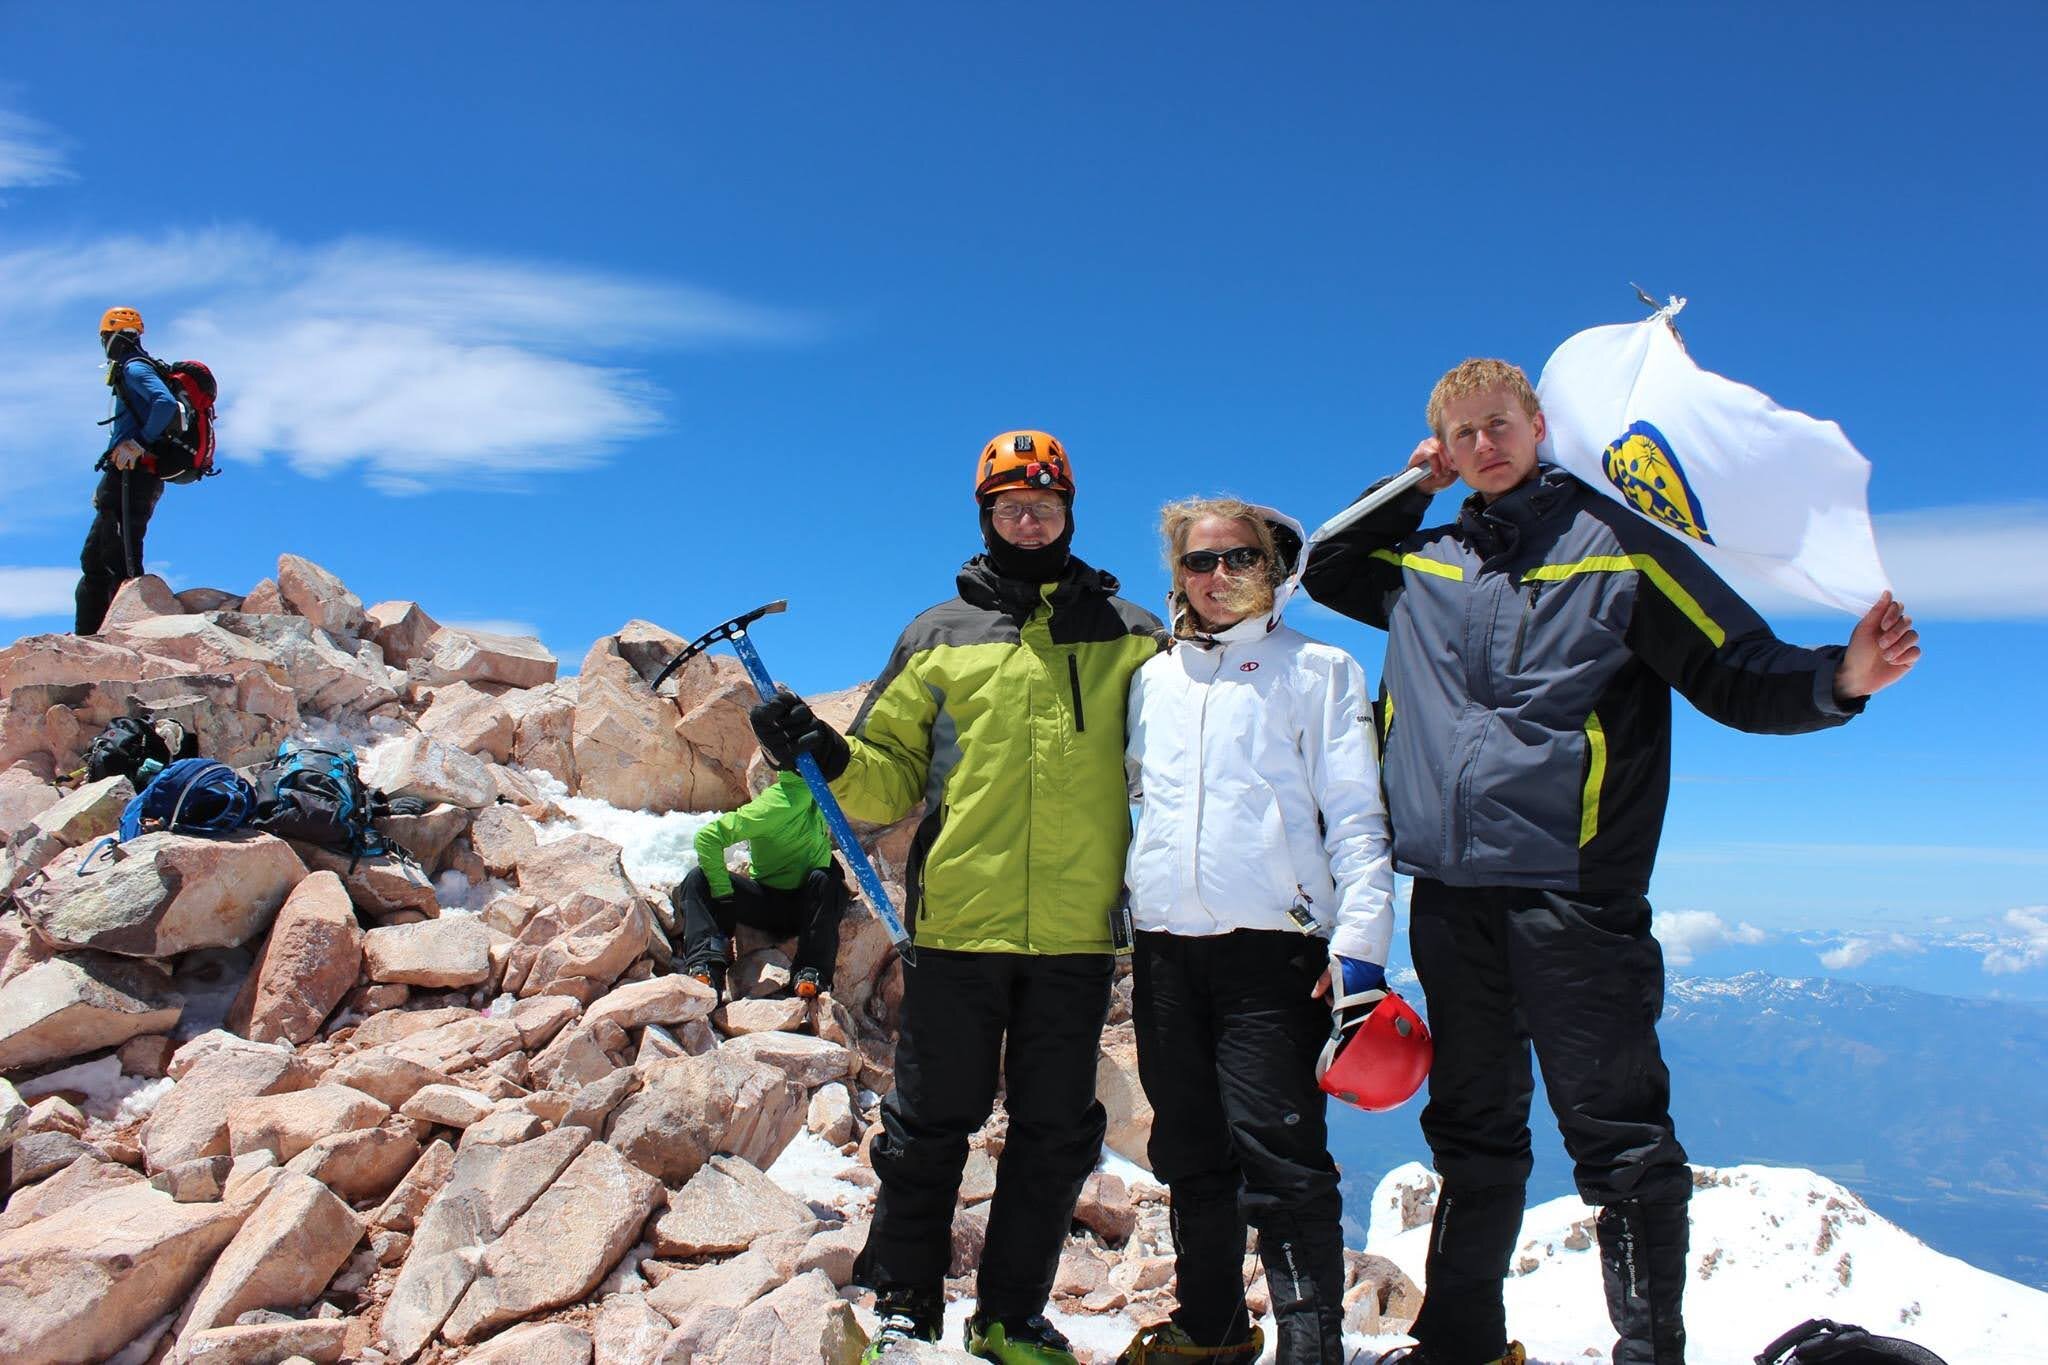  Gabriela (middle), her father (right), and her brother (left) climb Mount Shasta.  